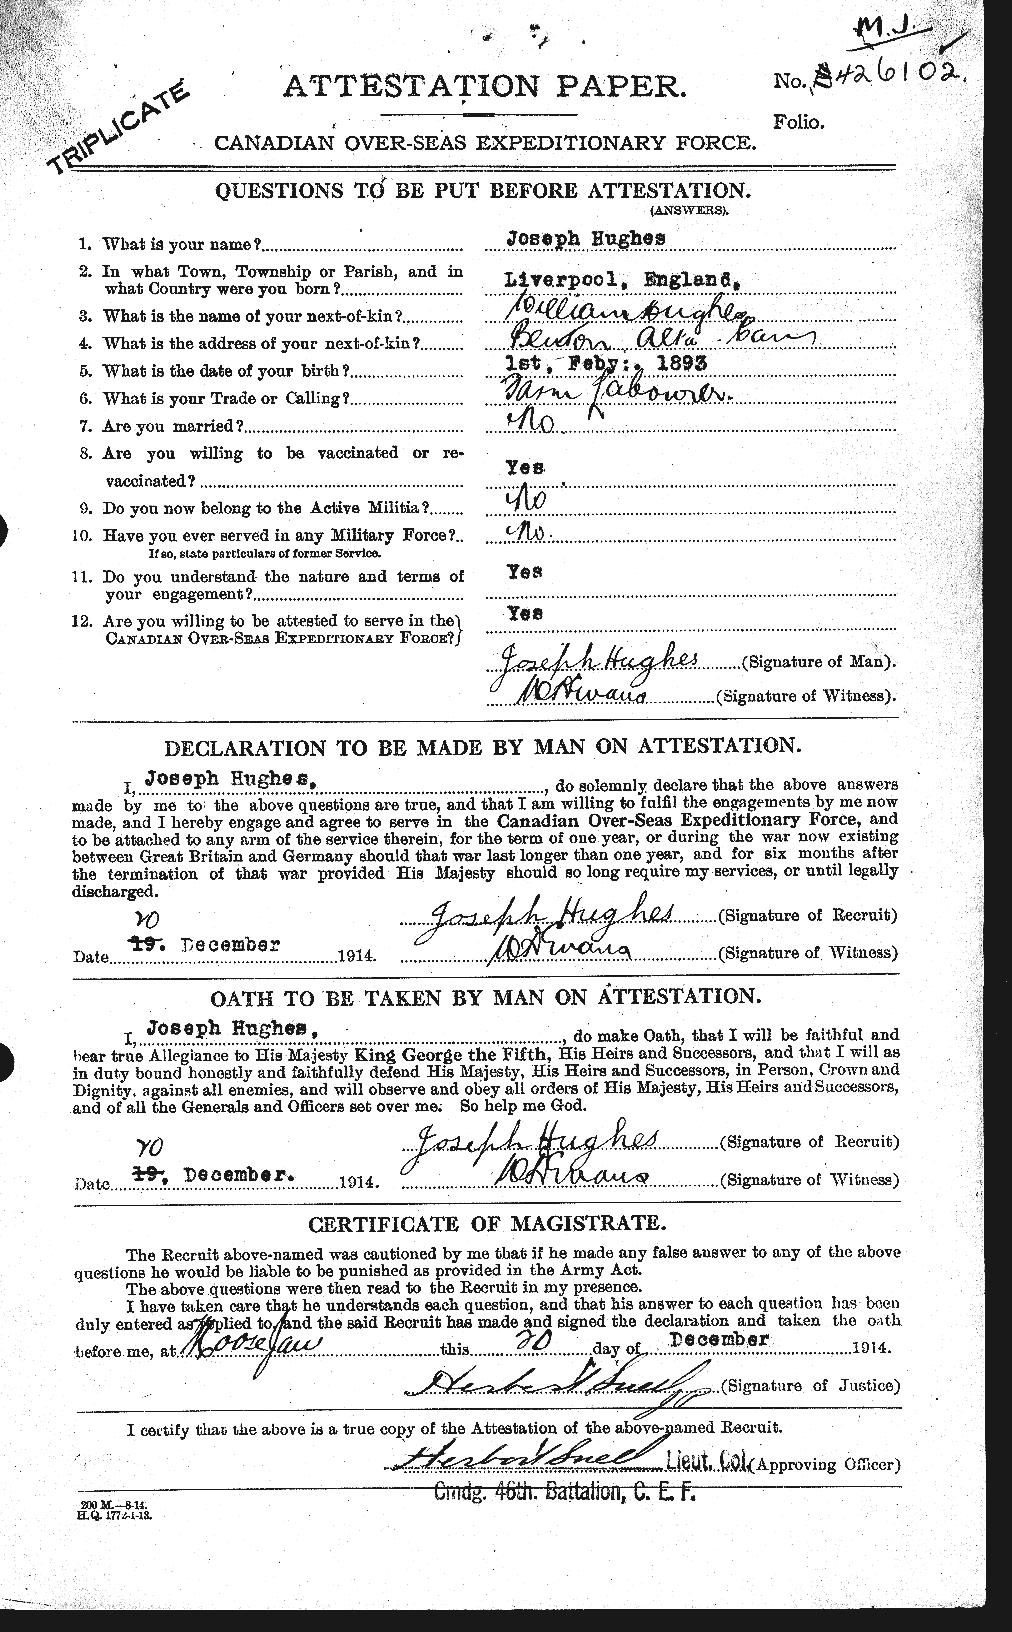 Personnel Records of the First World War - CEF 404070a